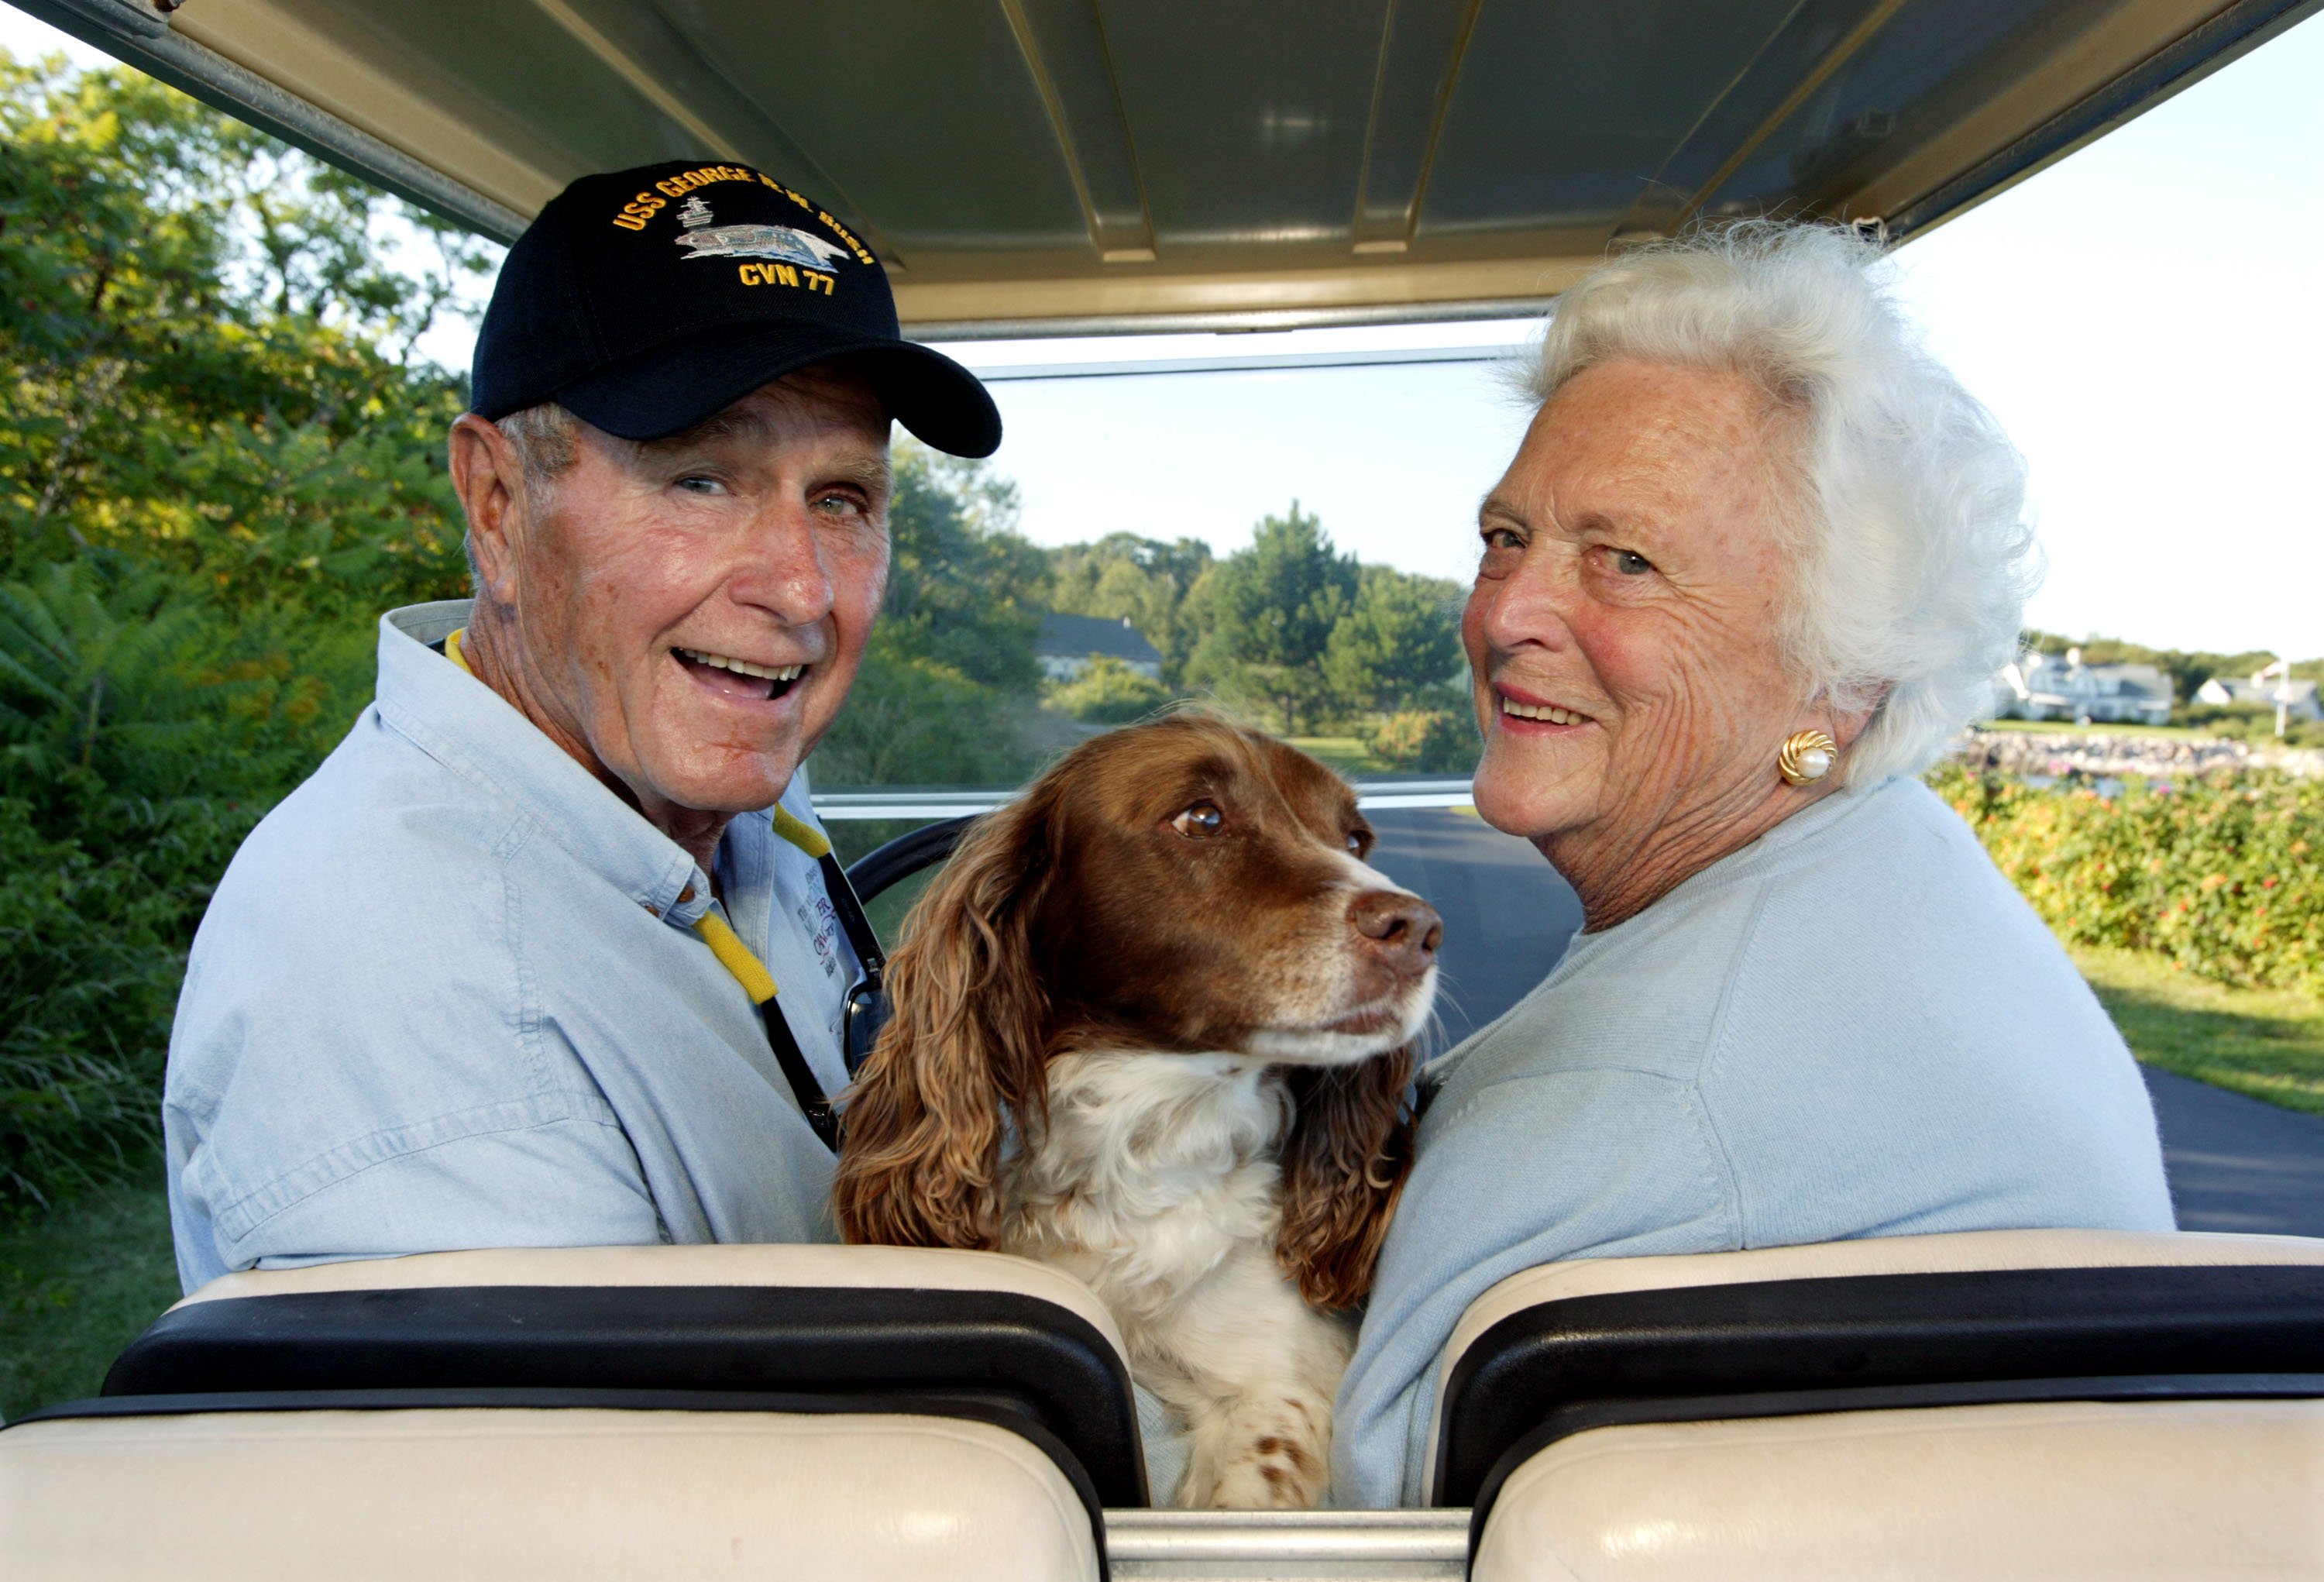 Former U.S. president George H. W. Bush and wife, Barbara Bush, cruise in the back of a golf cart with their dog Millie at their home at Walker's Point August 25, 2004 | Photo: Getty Images